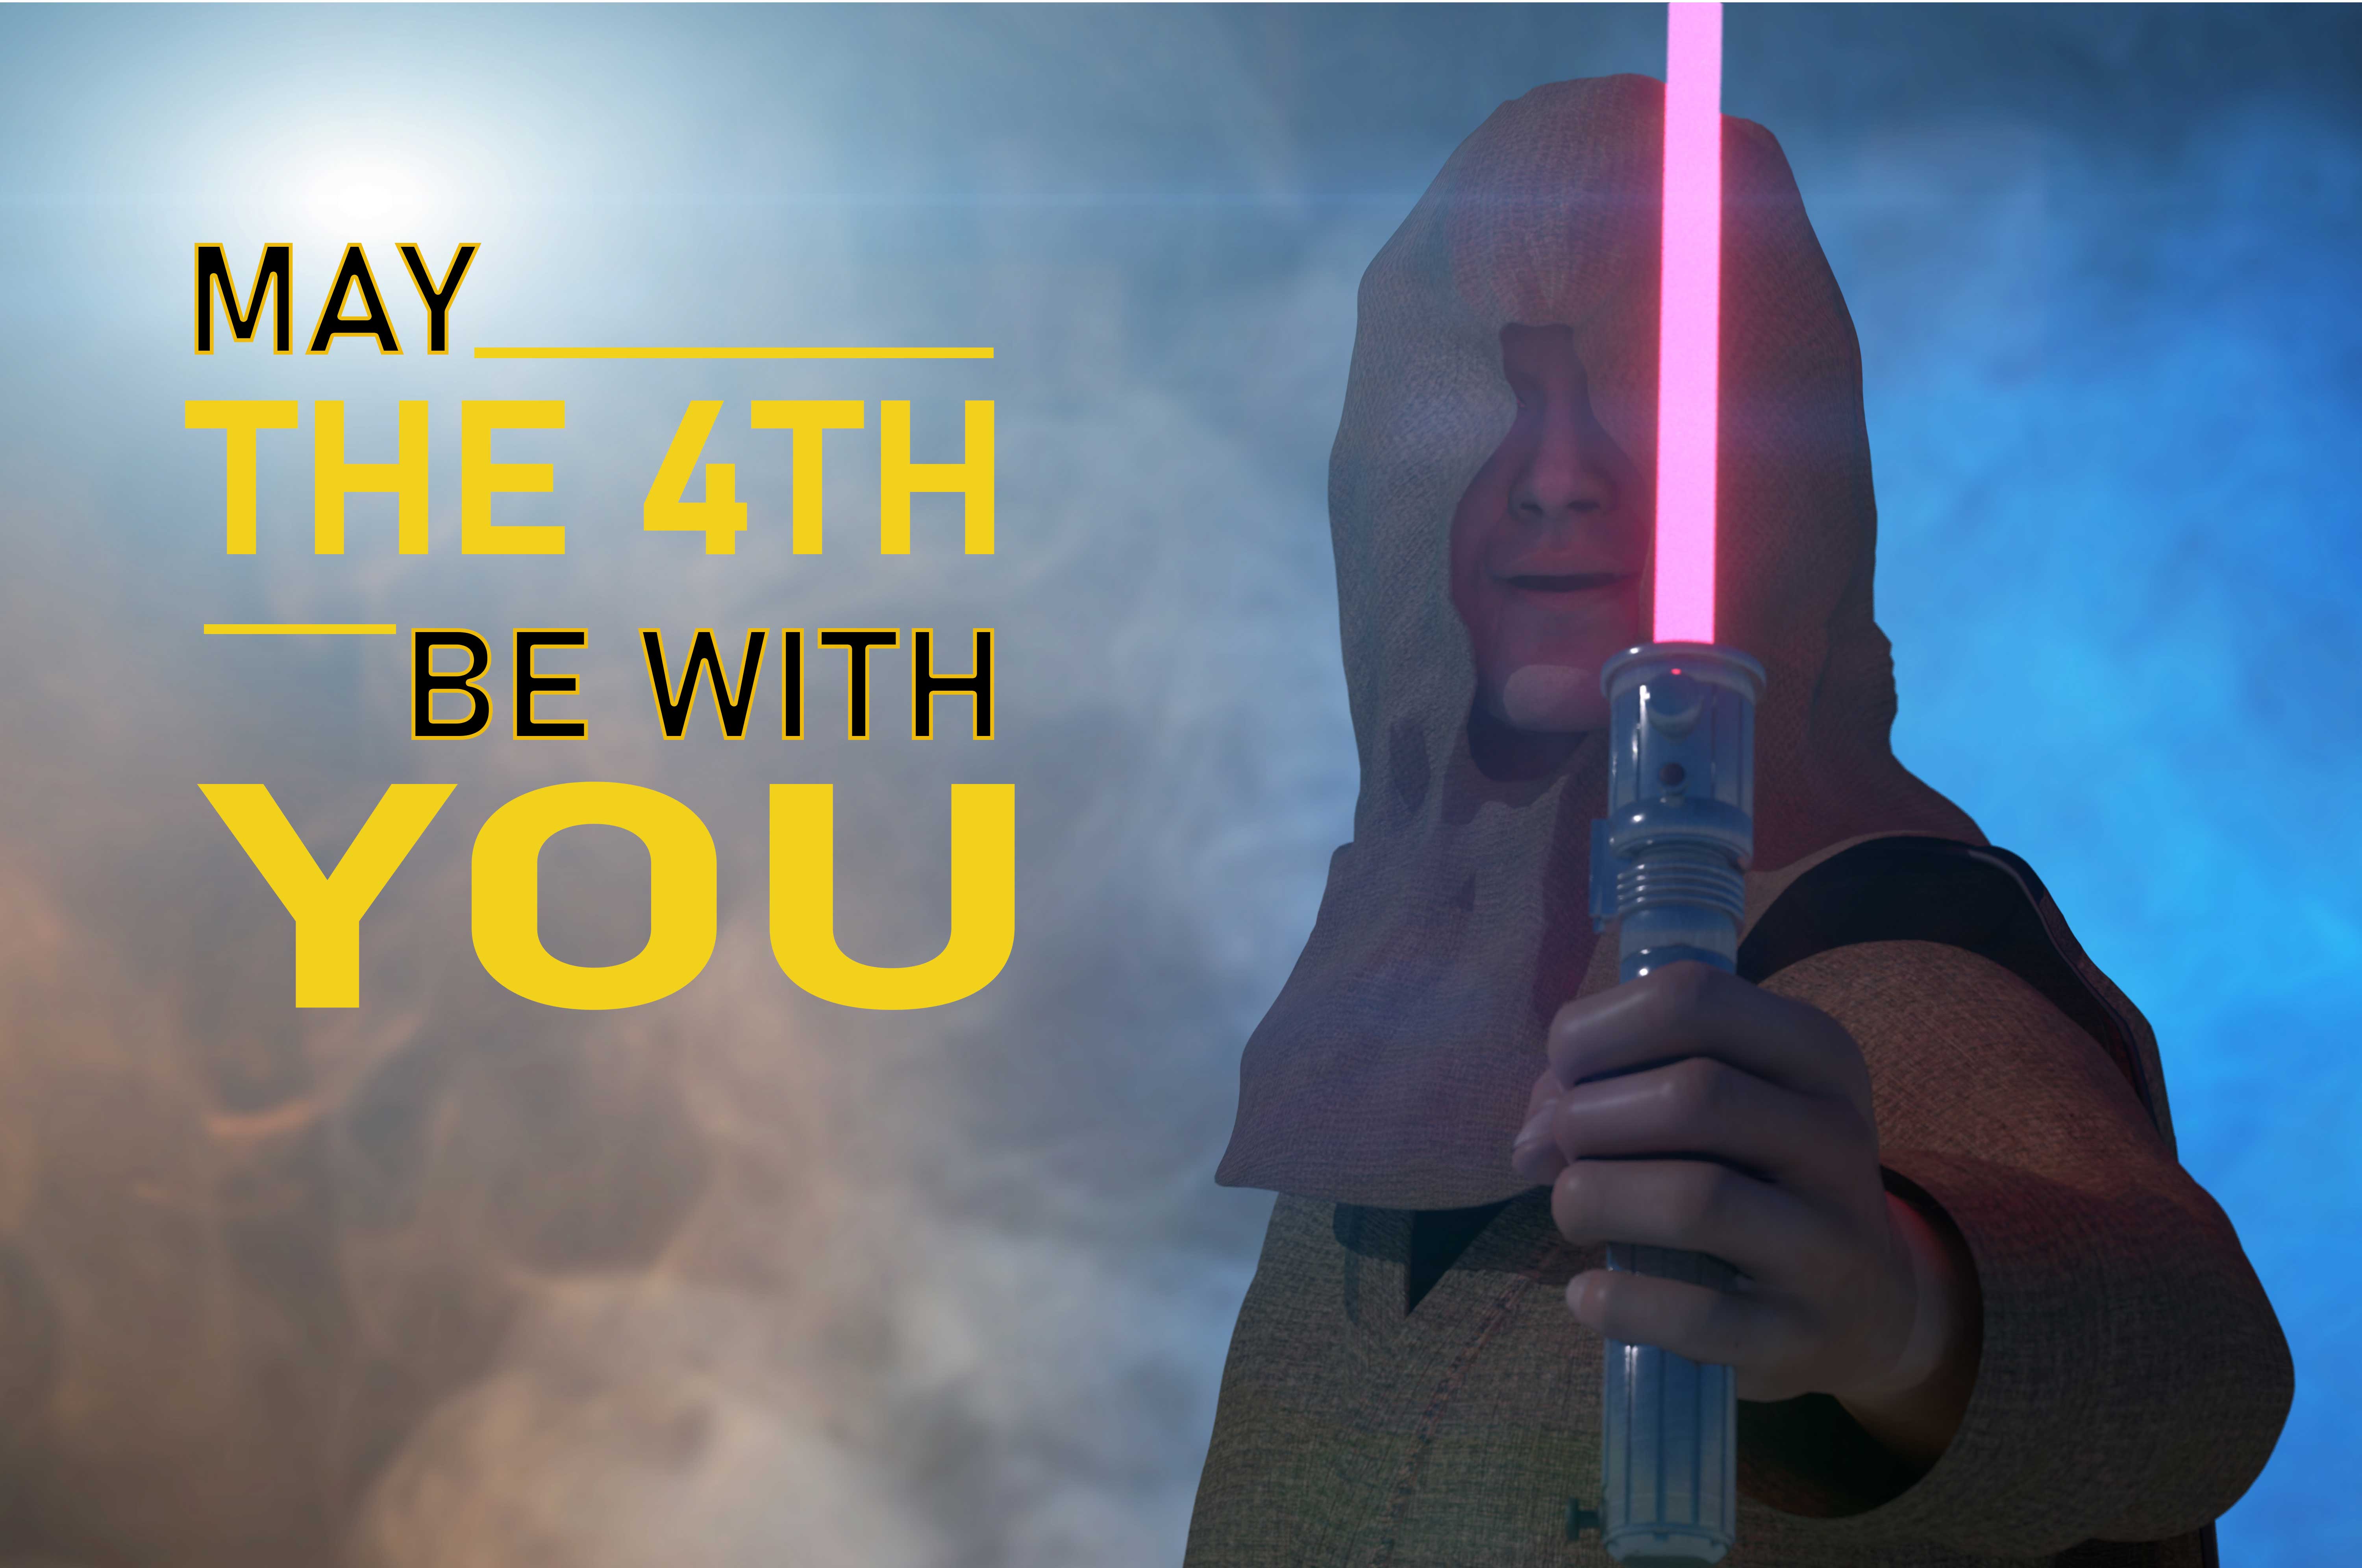 May the 4th be with you image